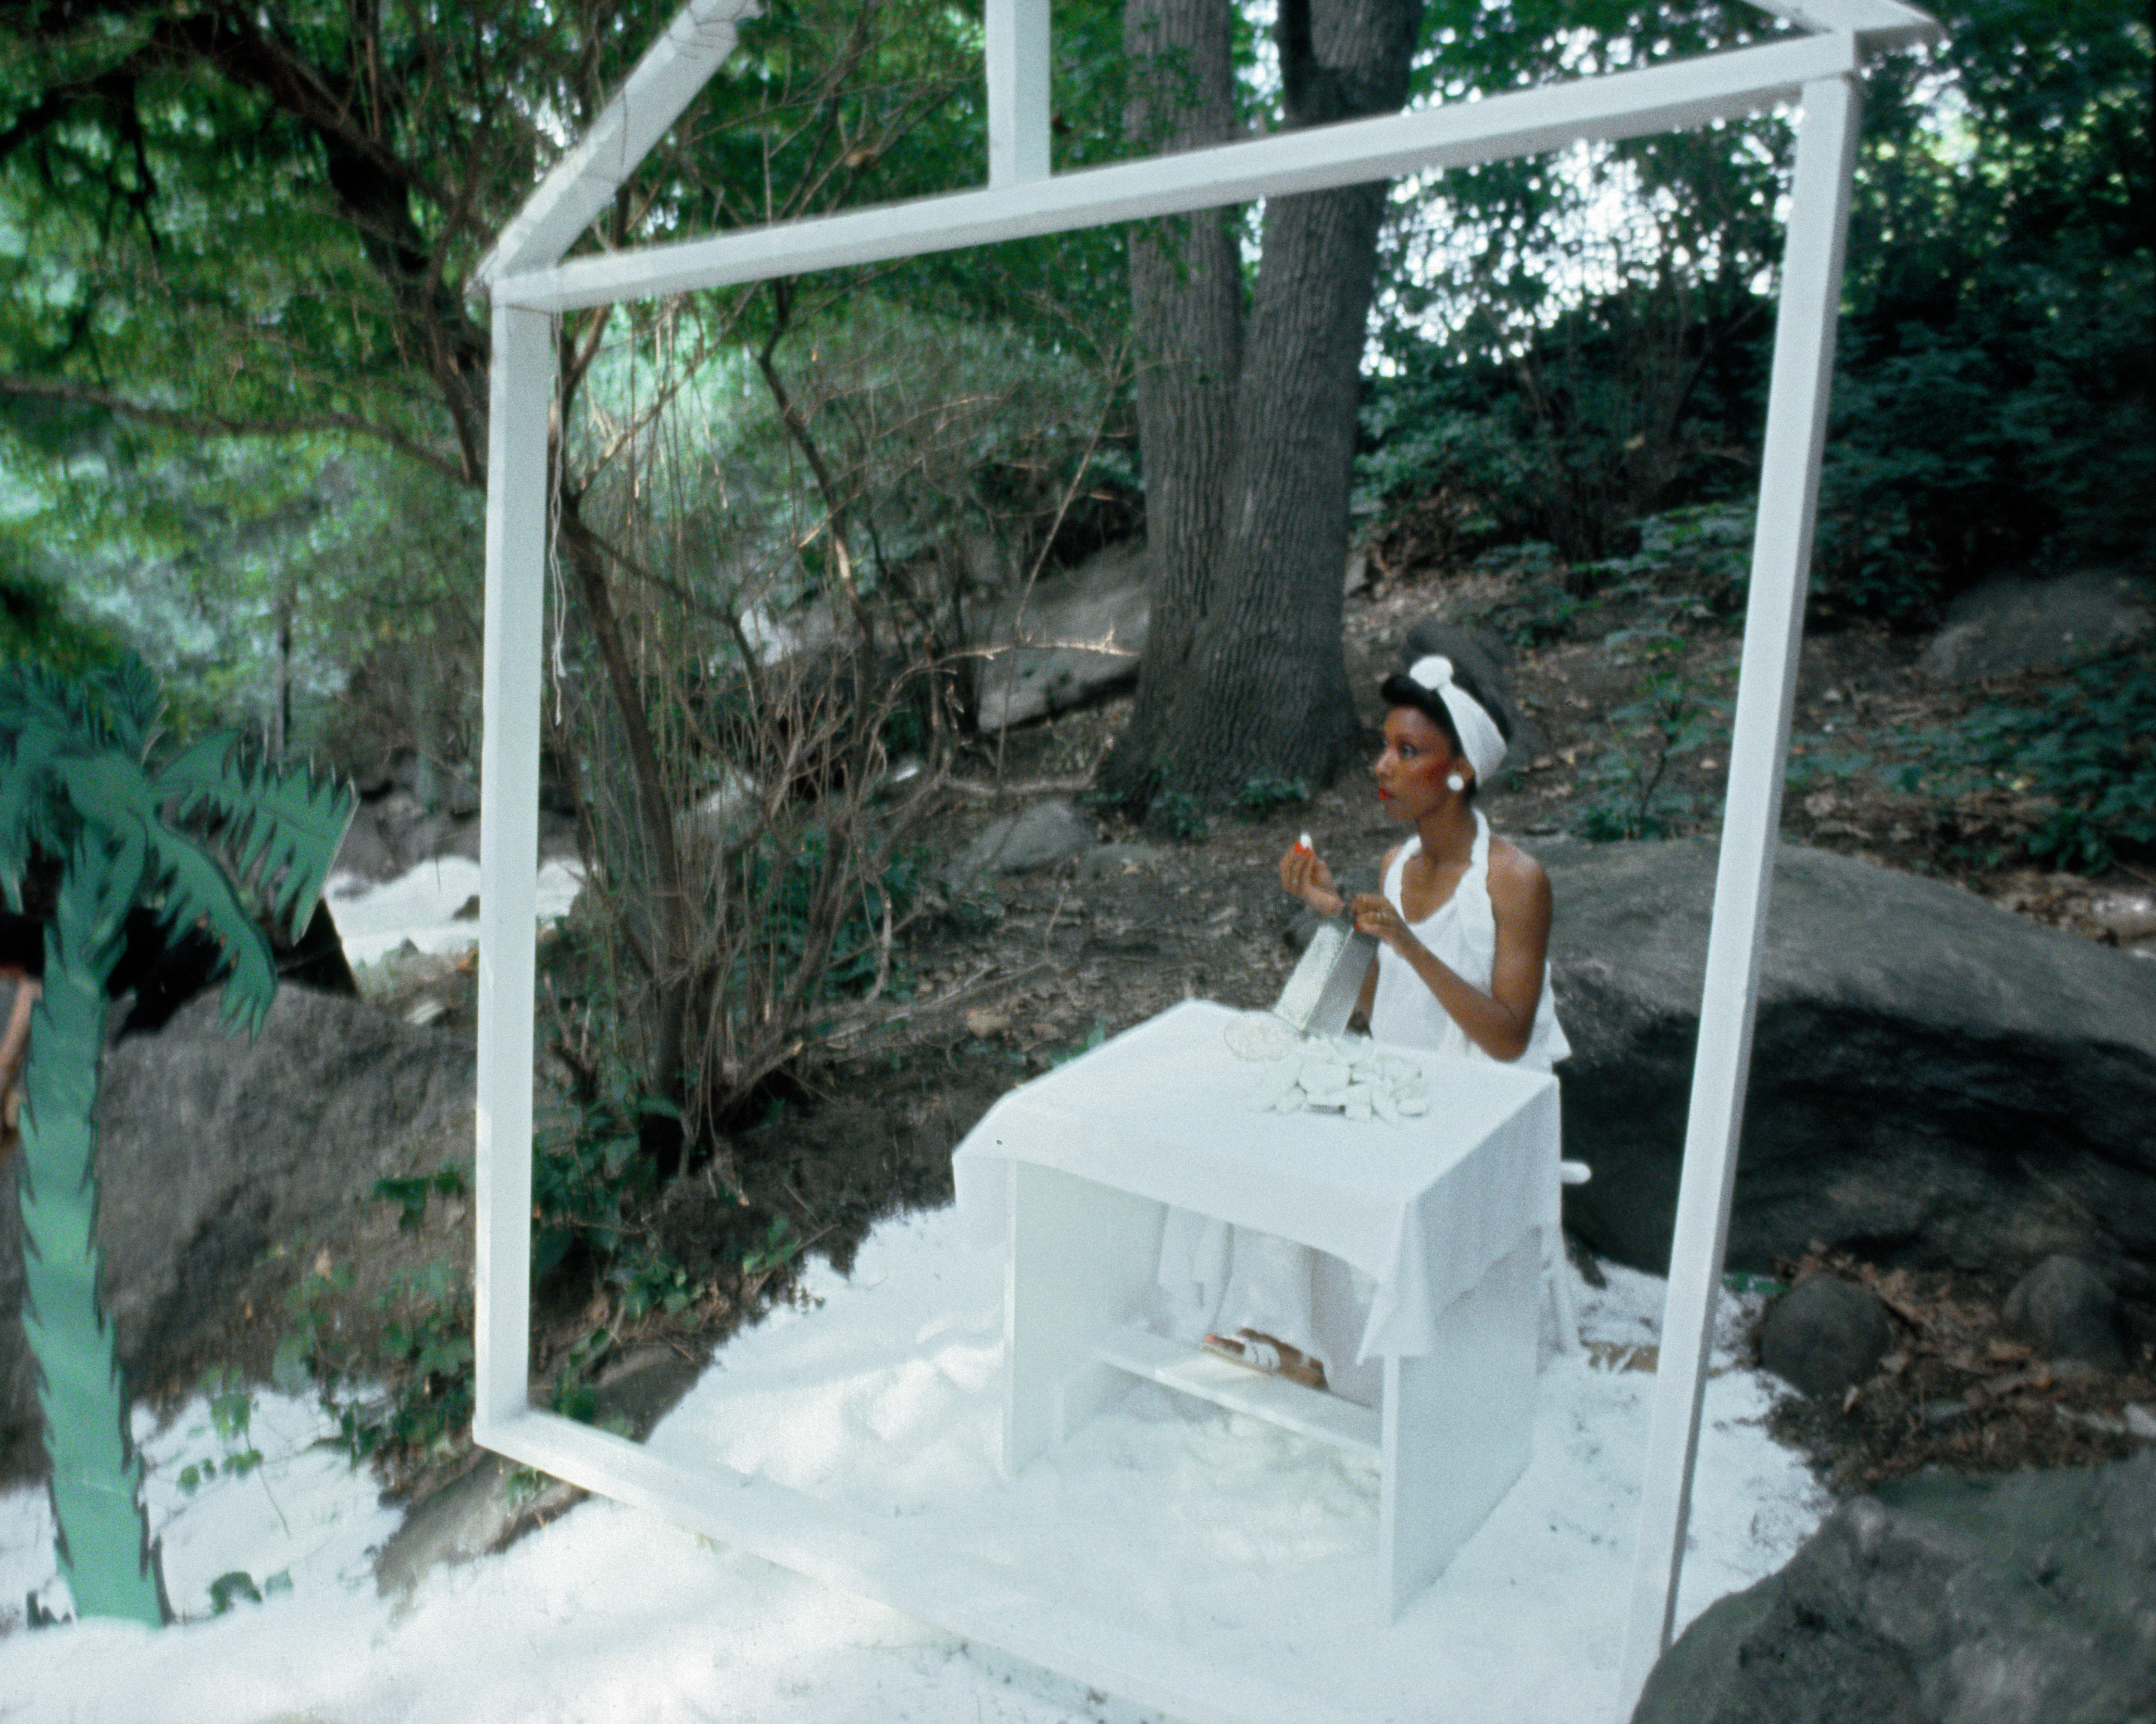 Rivers, First Draft: The Woman in the White Kitchen tastes her coconut, 1982/2015, Digital C-print from Kodachrome 35mm slides in 48 parts, 16h x 20w in (40.64h x 50.80w cm)